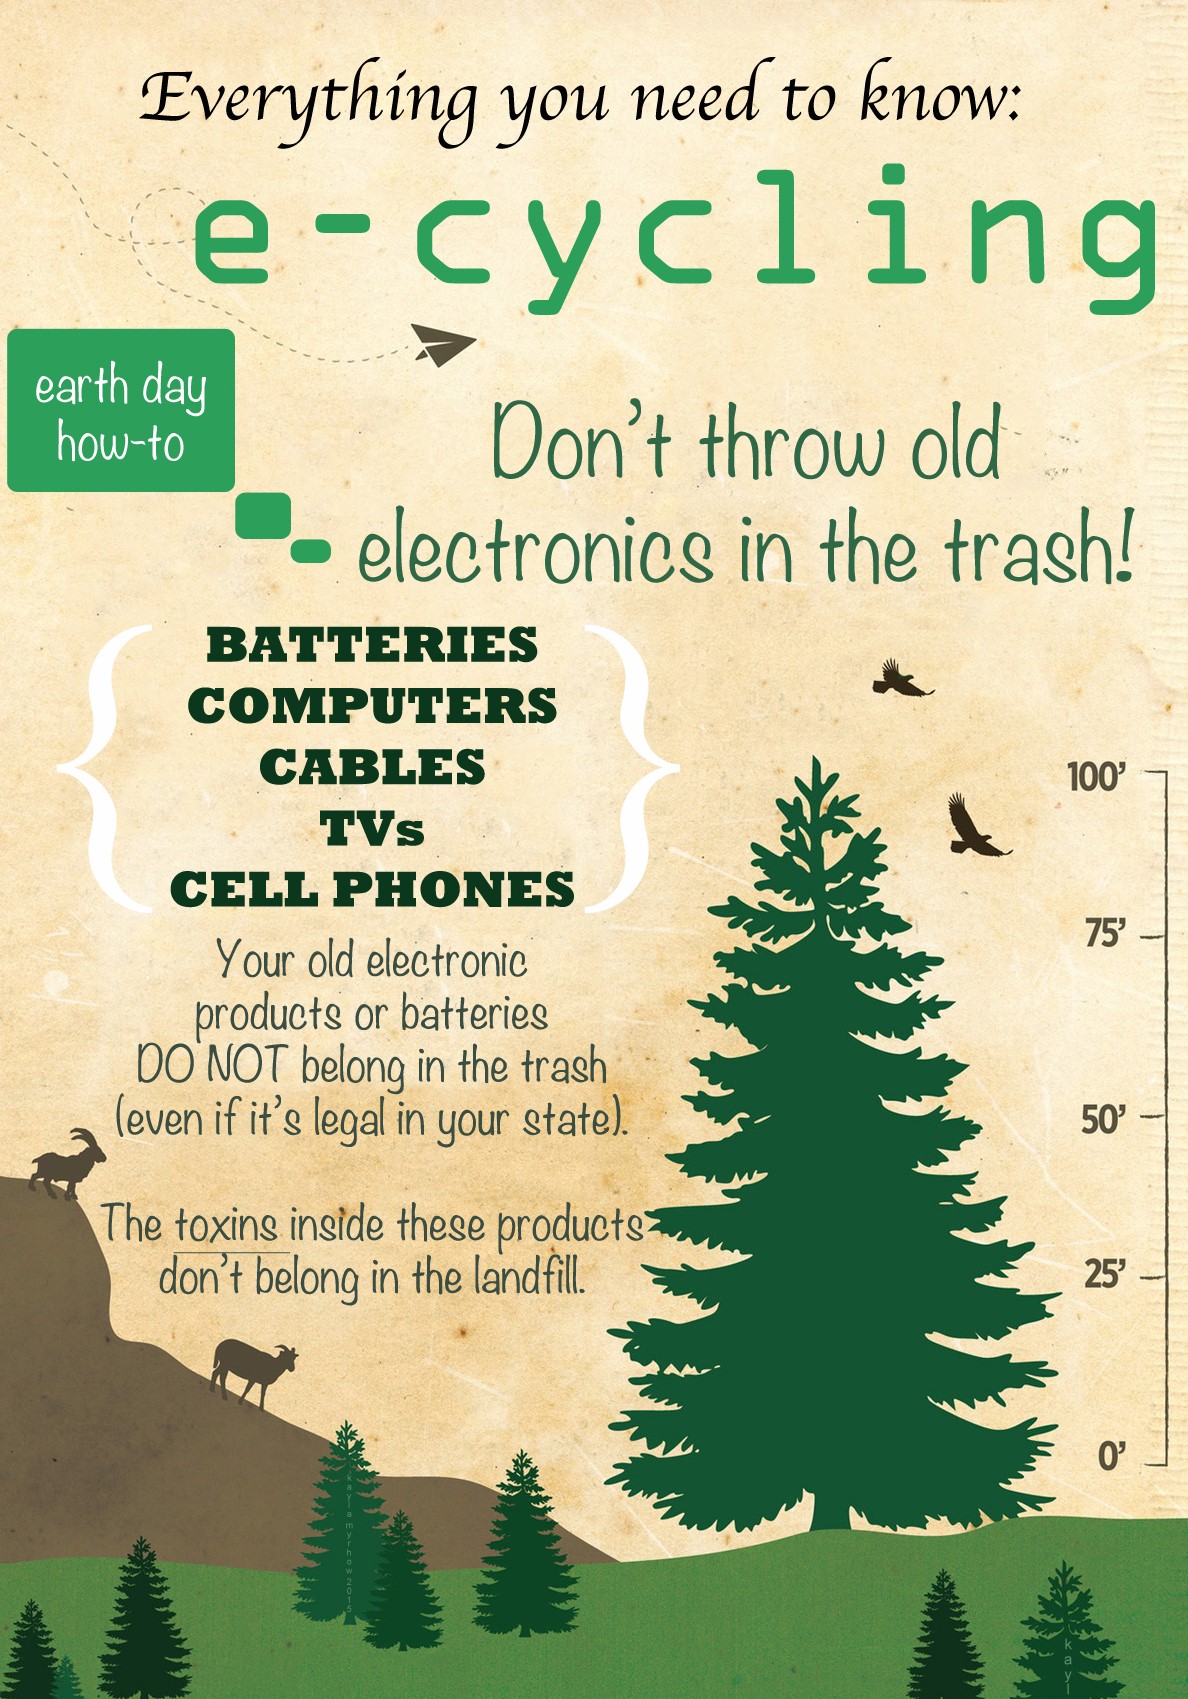 Earth Day Infographic